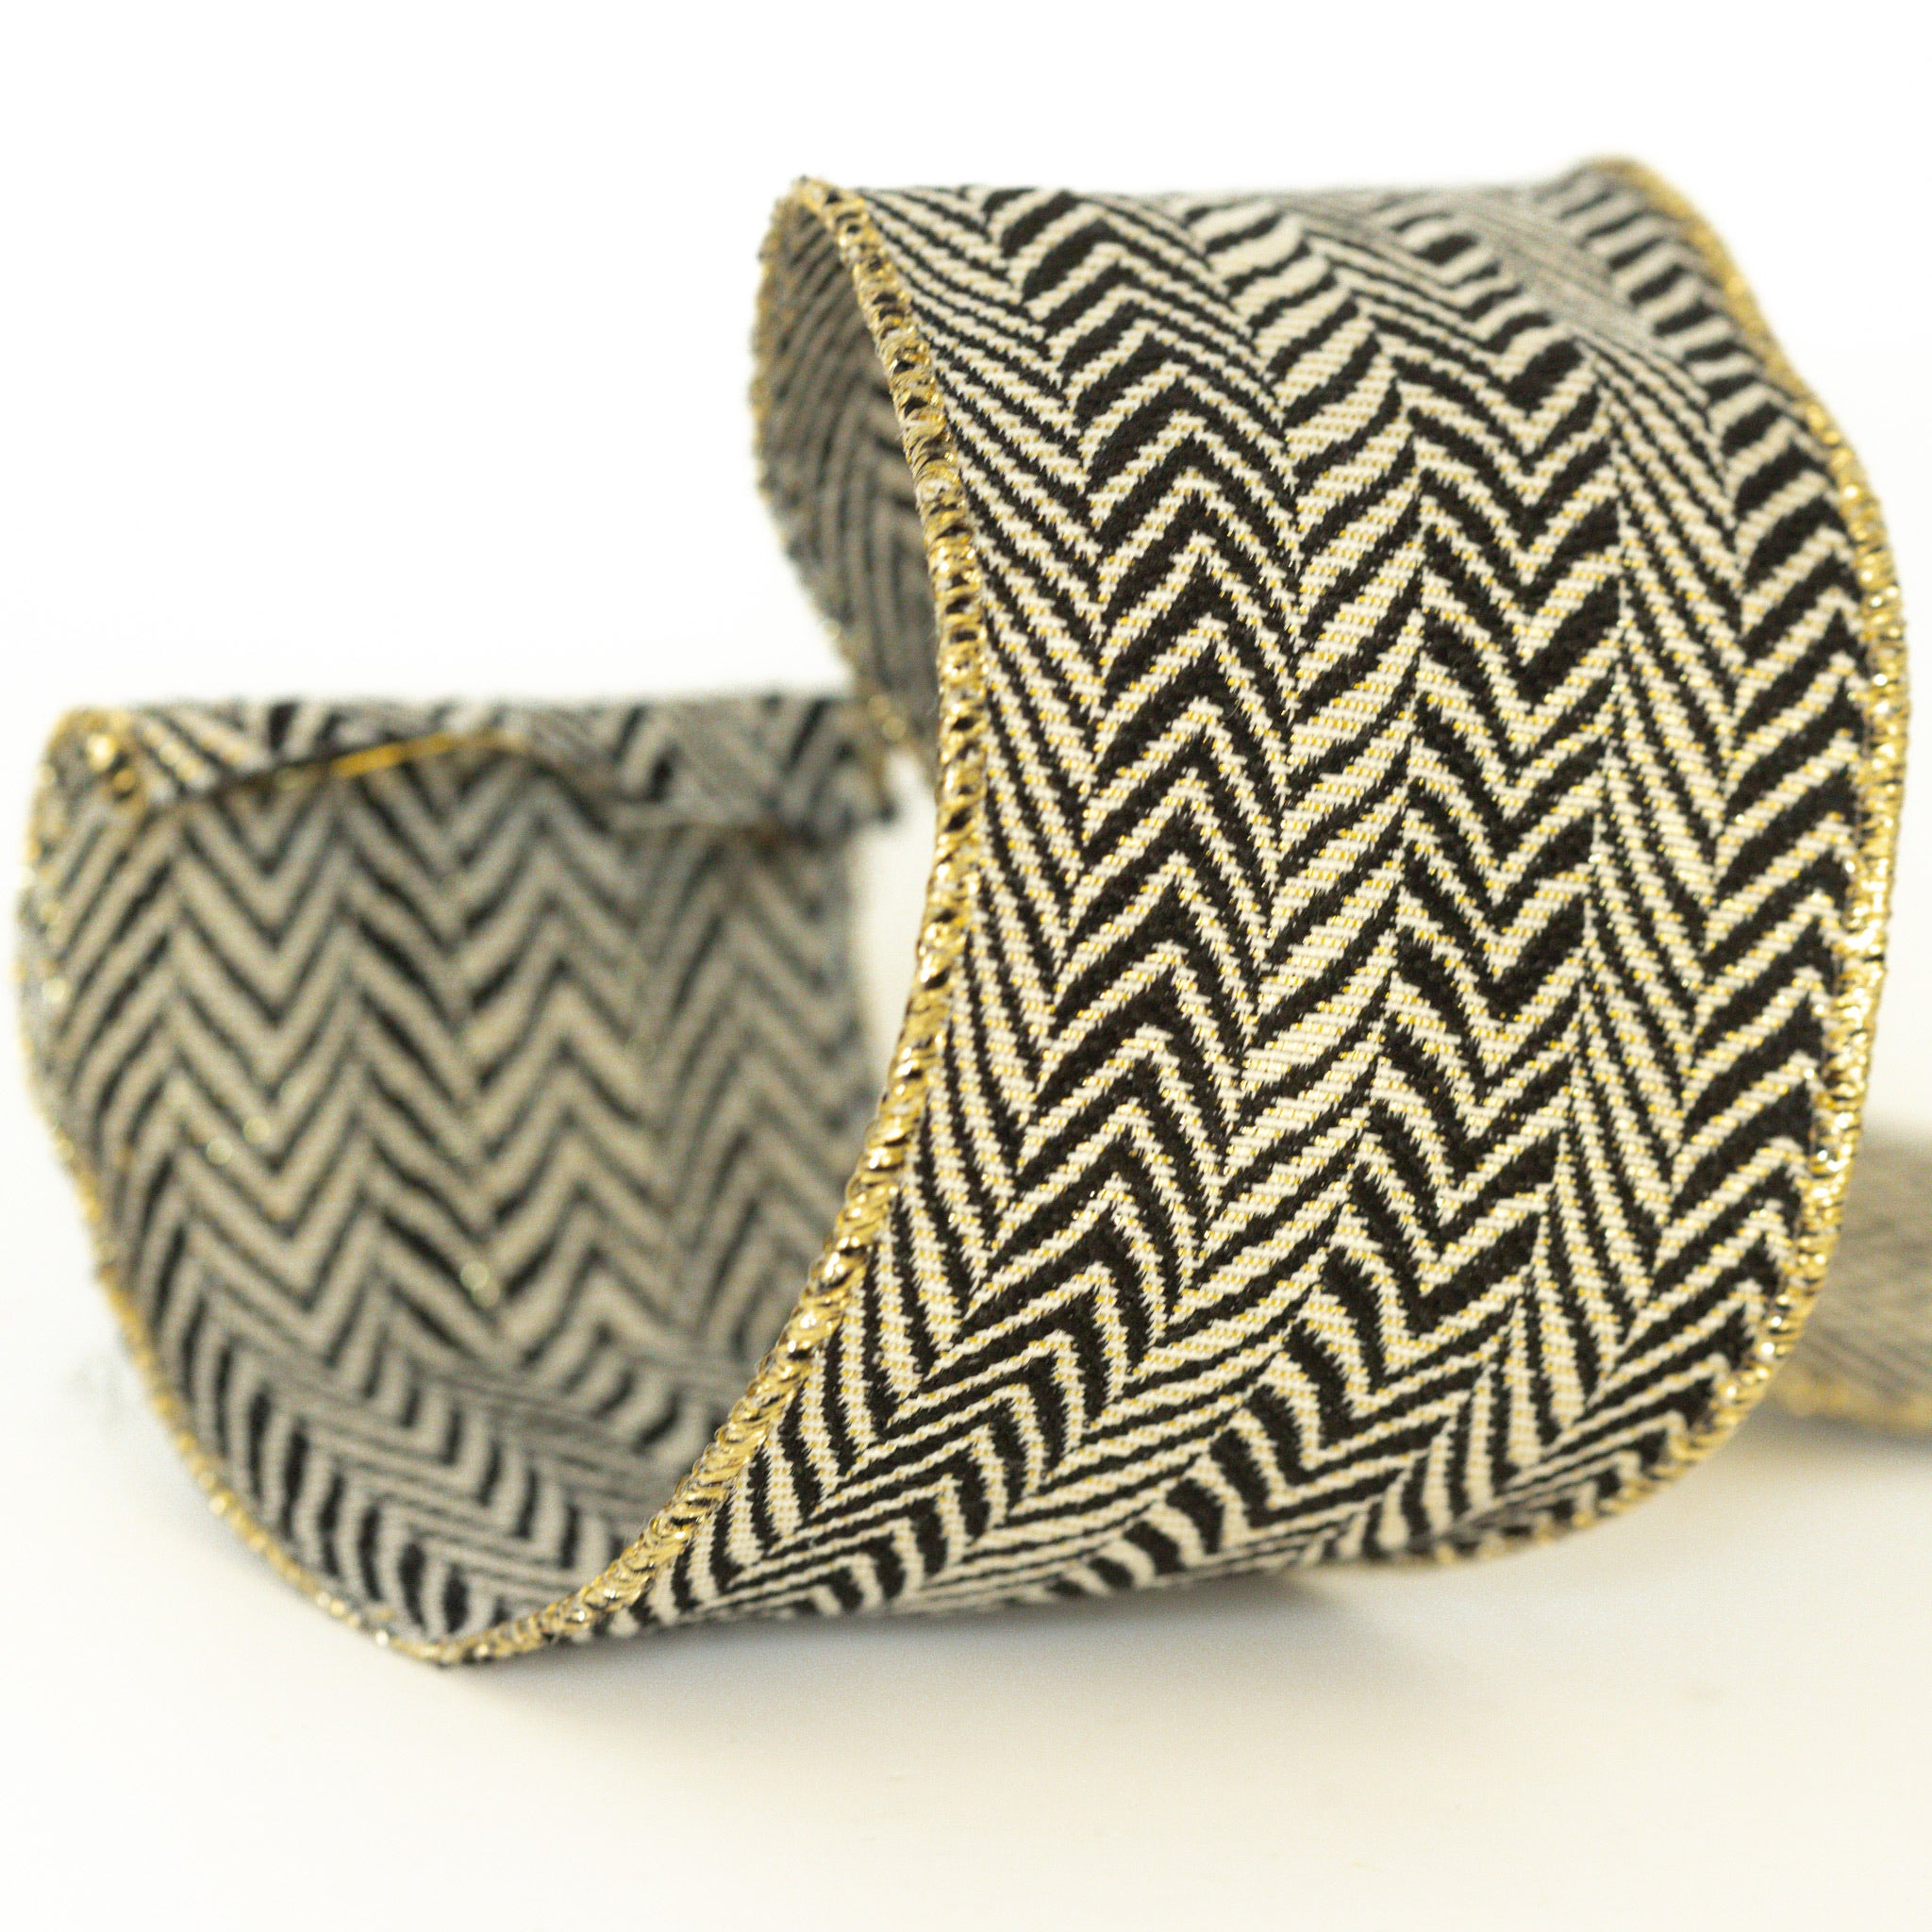 Black and Ivory Chevron Ribbon with Gold Trim